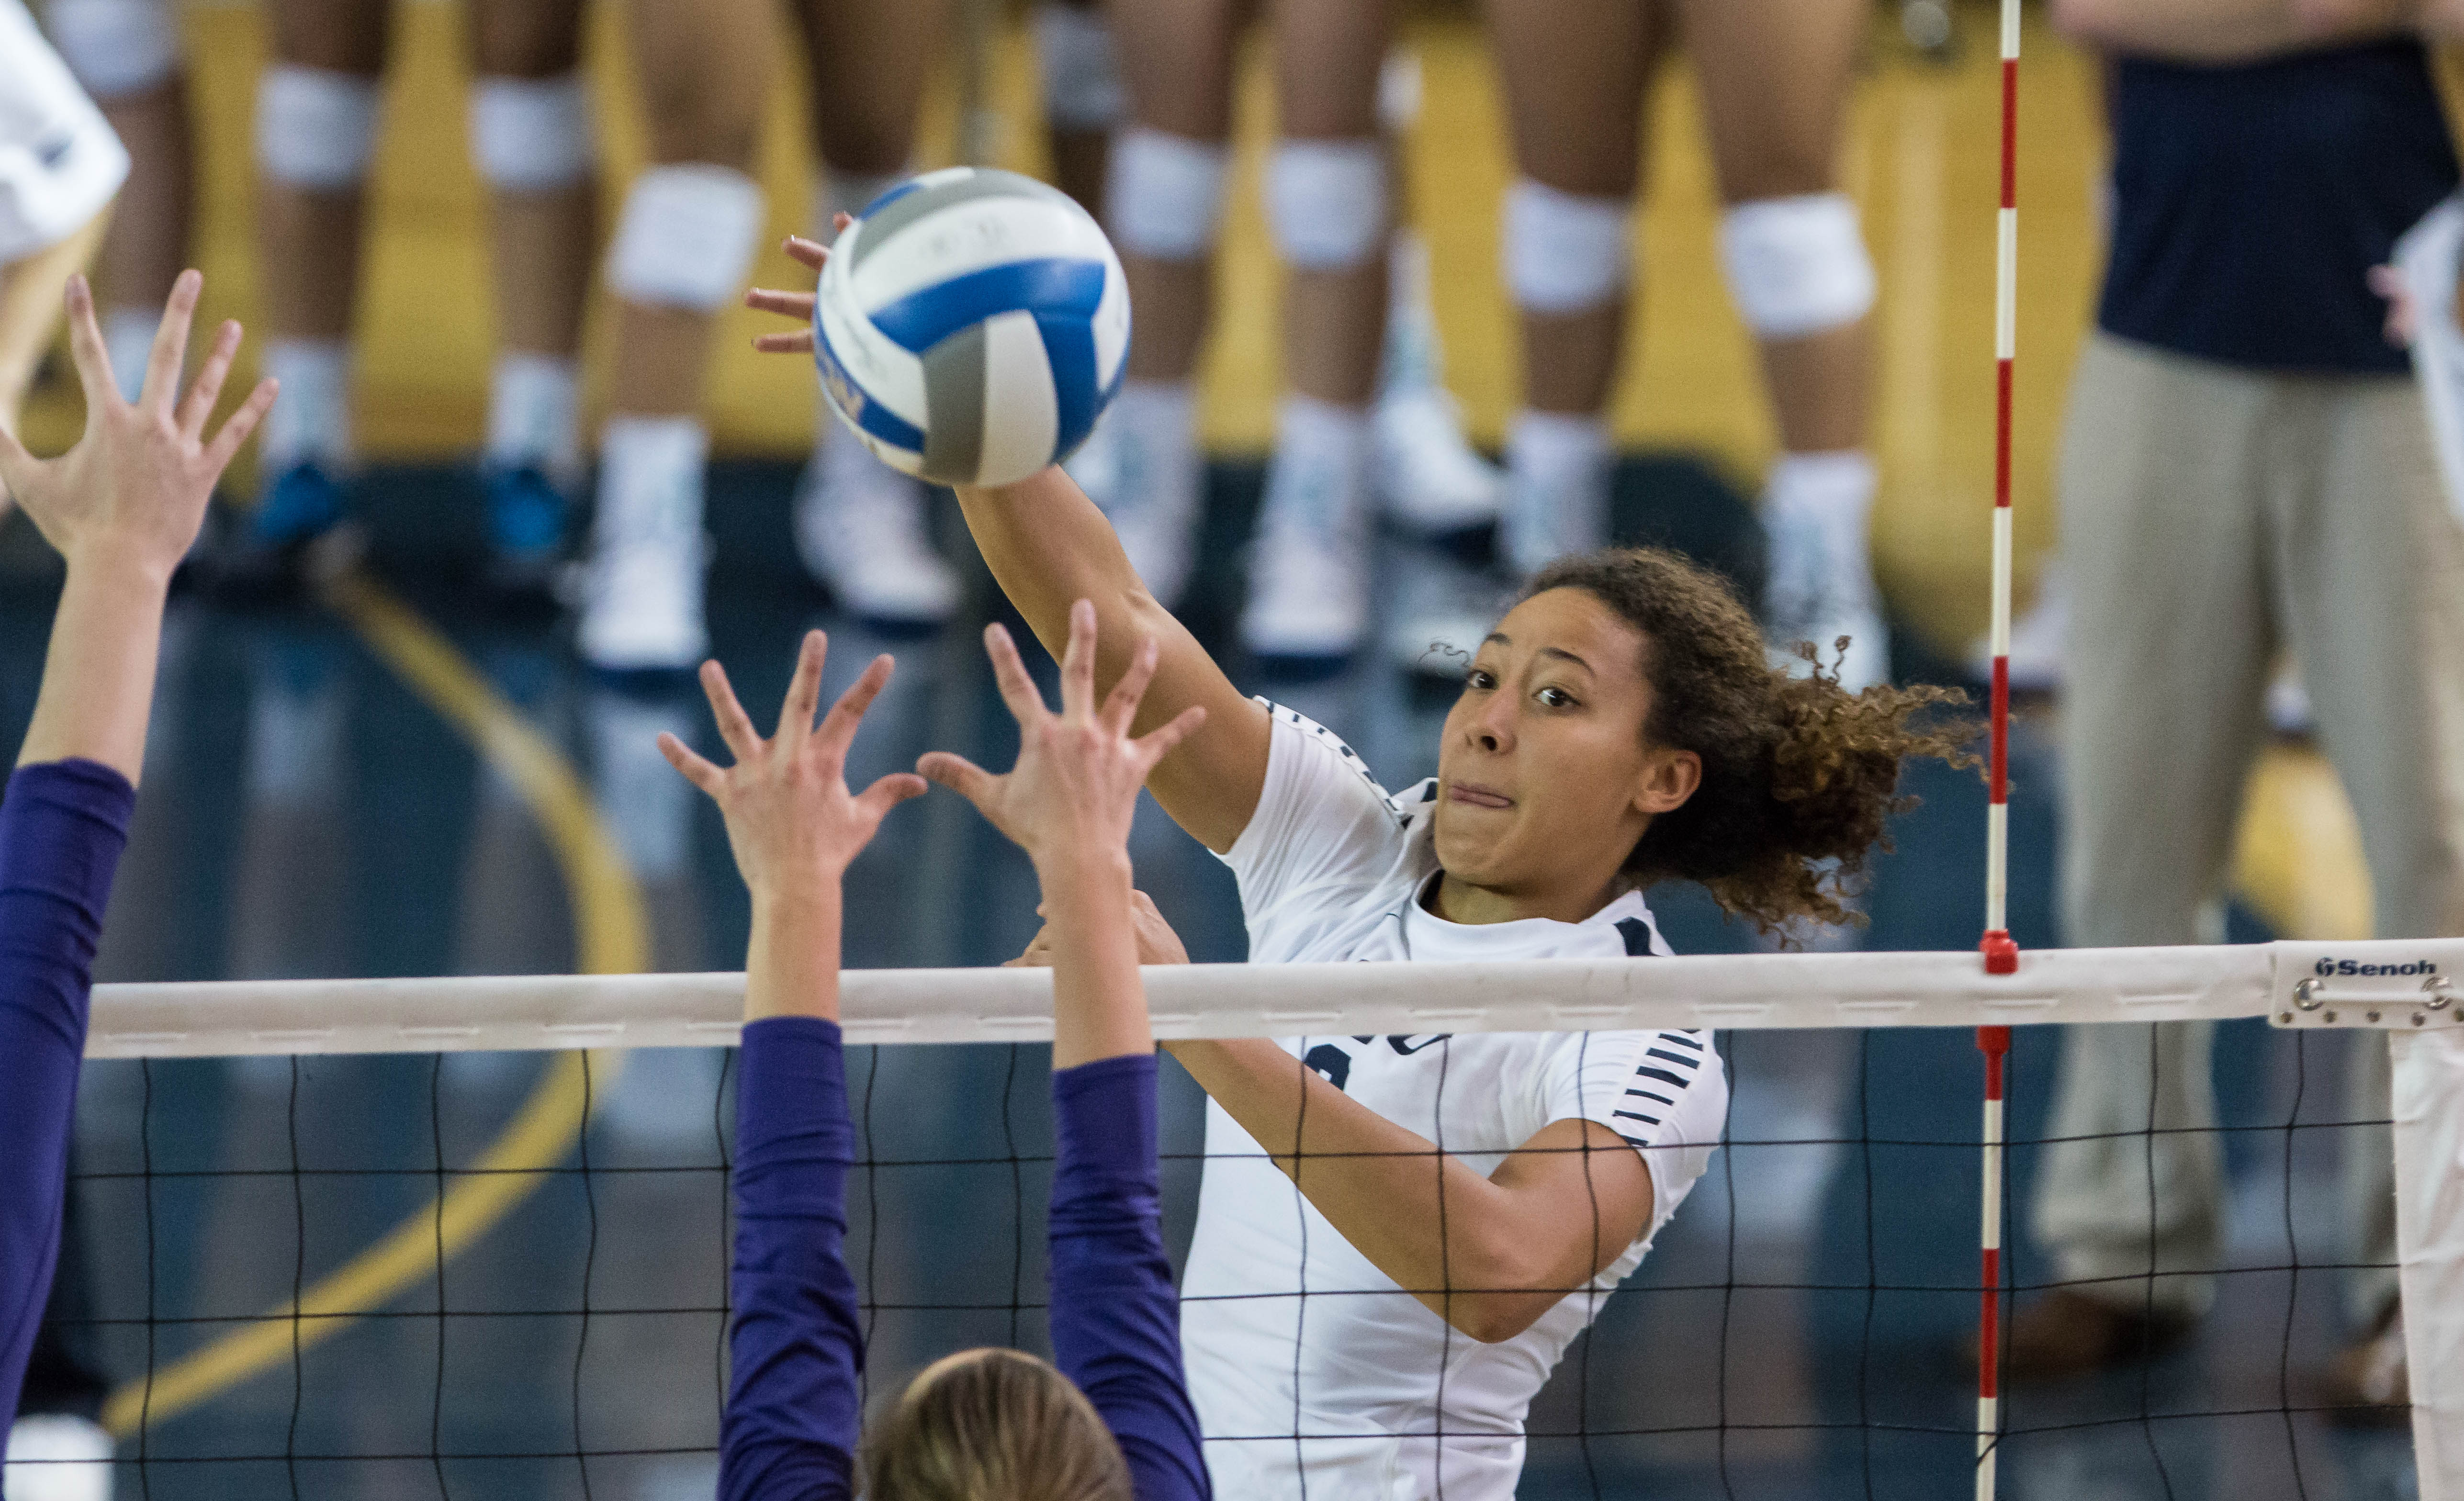 Alexa Gray Earns Wcc Player Of The Week The Daily Universe